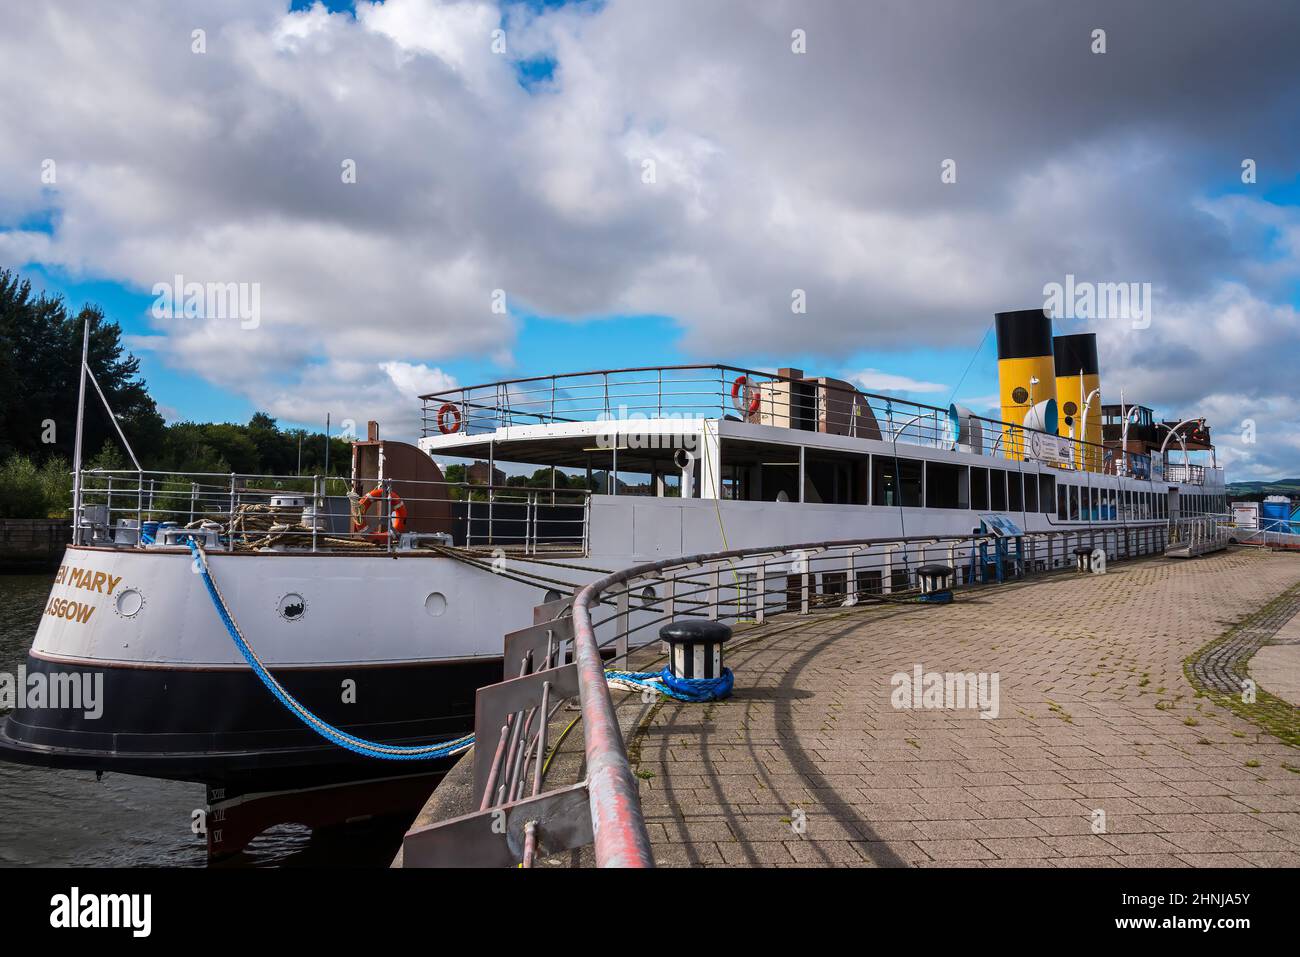 TS Queen Mary paddle steamer being restored at Pacific Quay, Glasgow Stock Photo